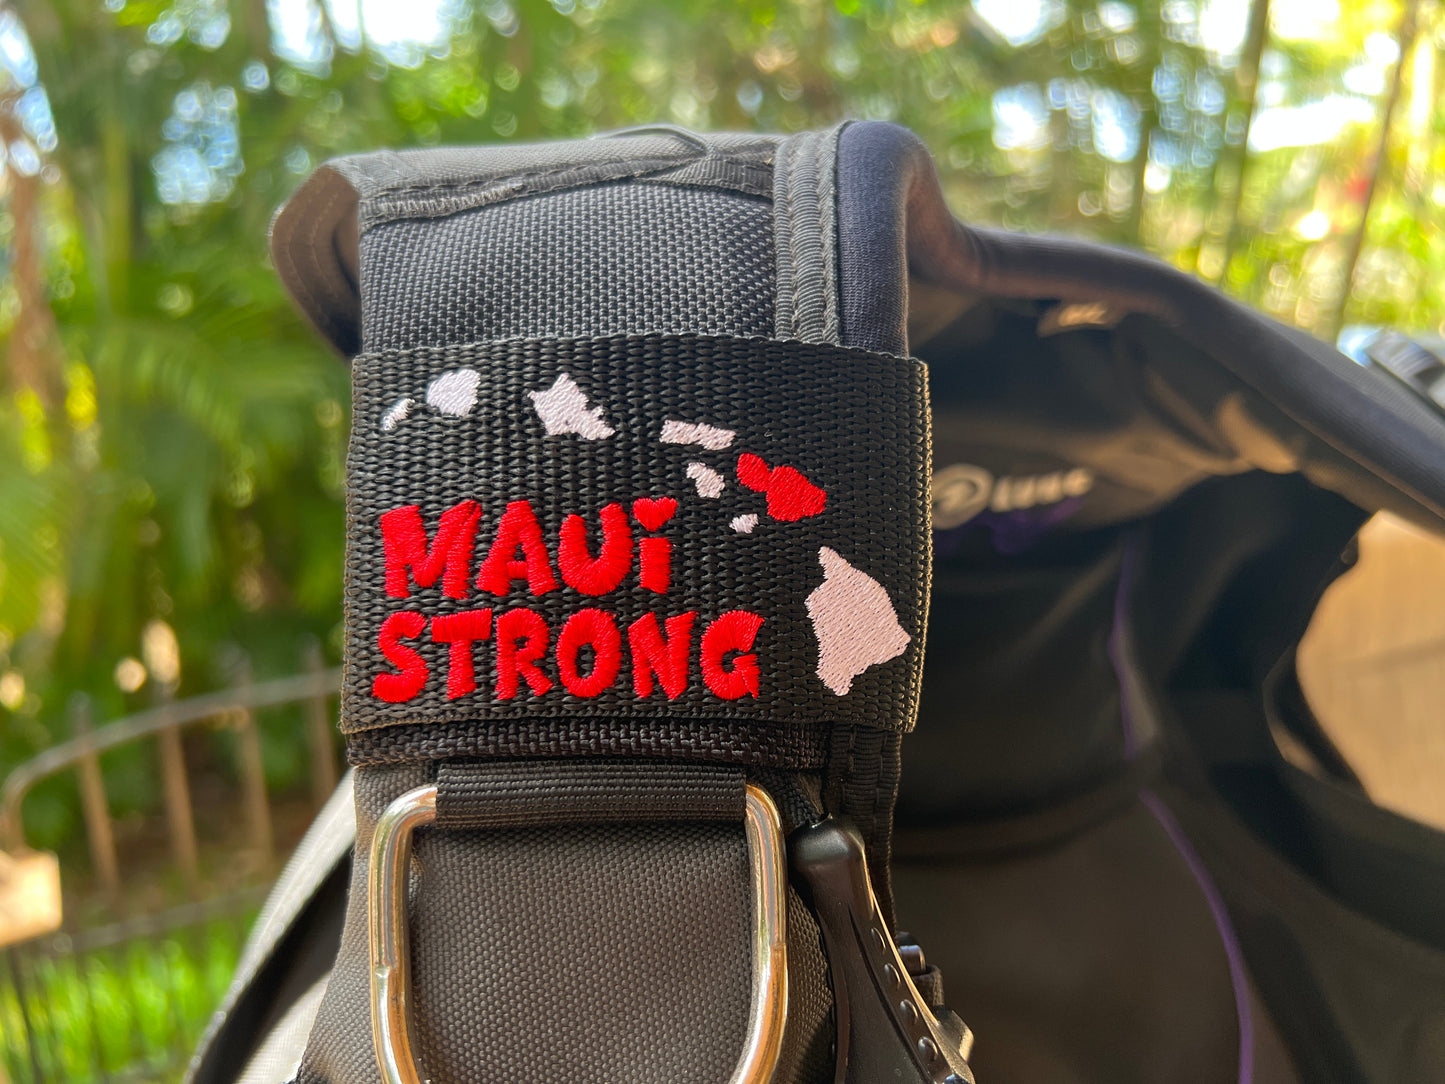 Maui Strong BCD Tag, Support Maui Wildfire Victims and their pets. 100% proceeds go to Local Maui Charities, Lahaina Strong